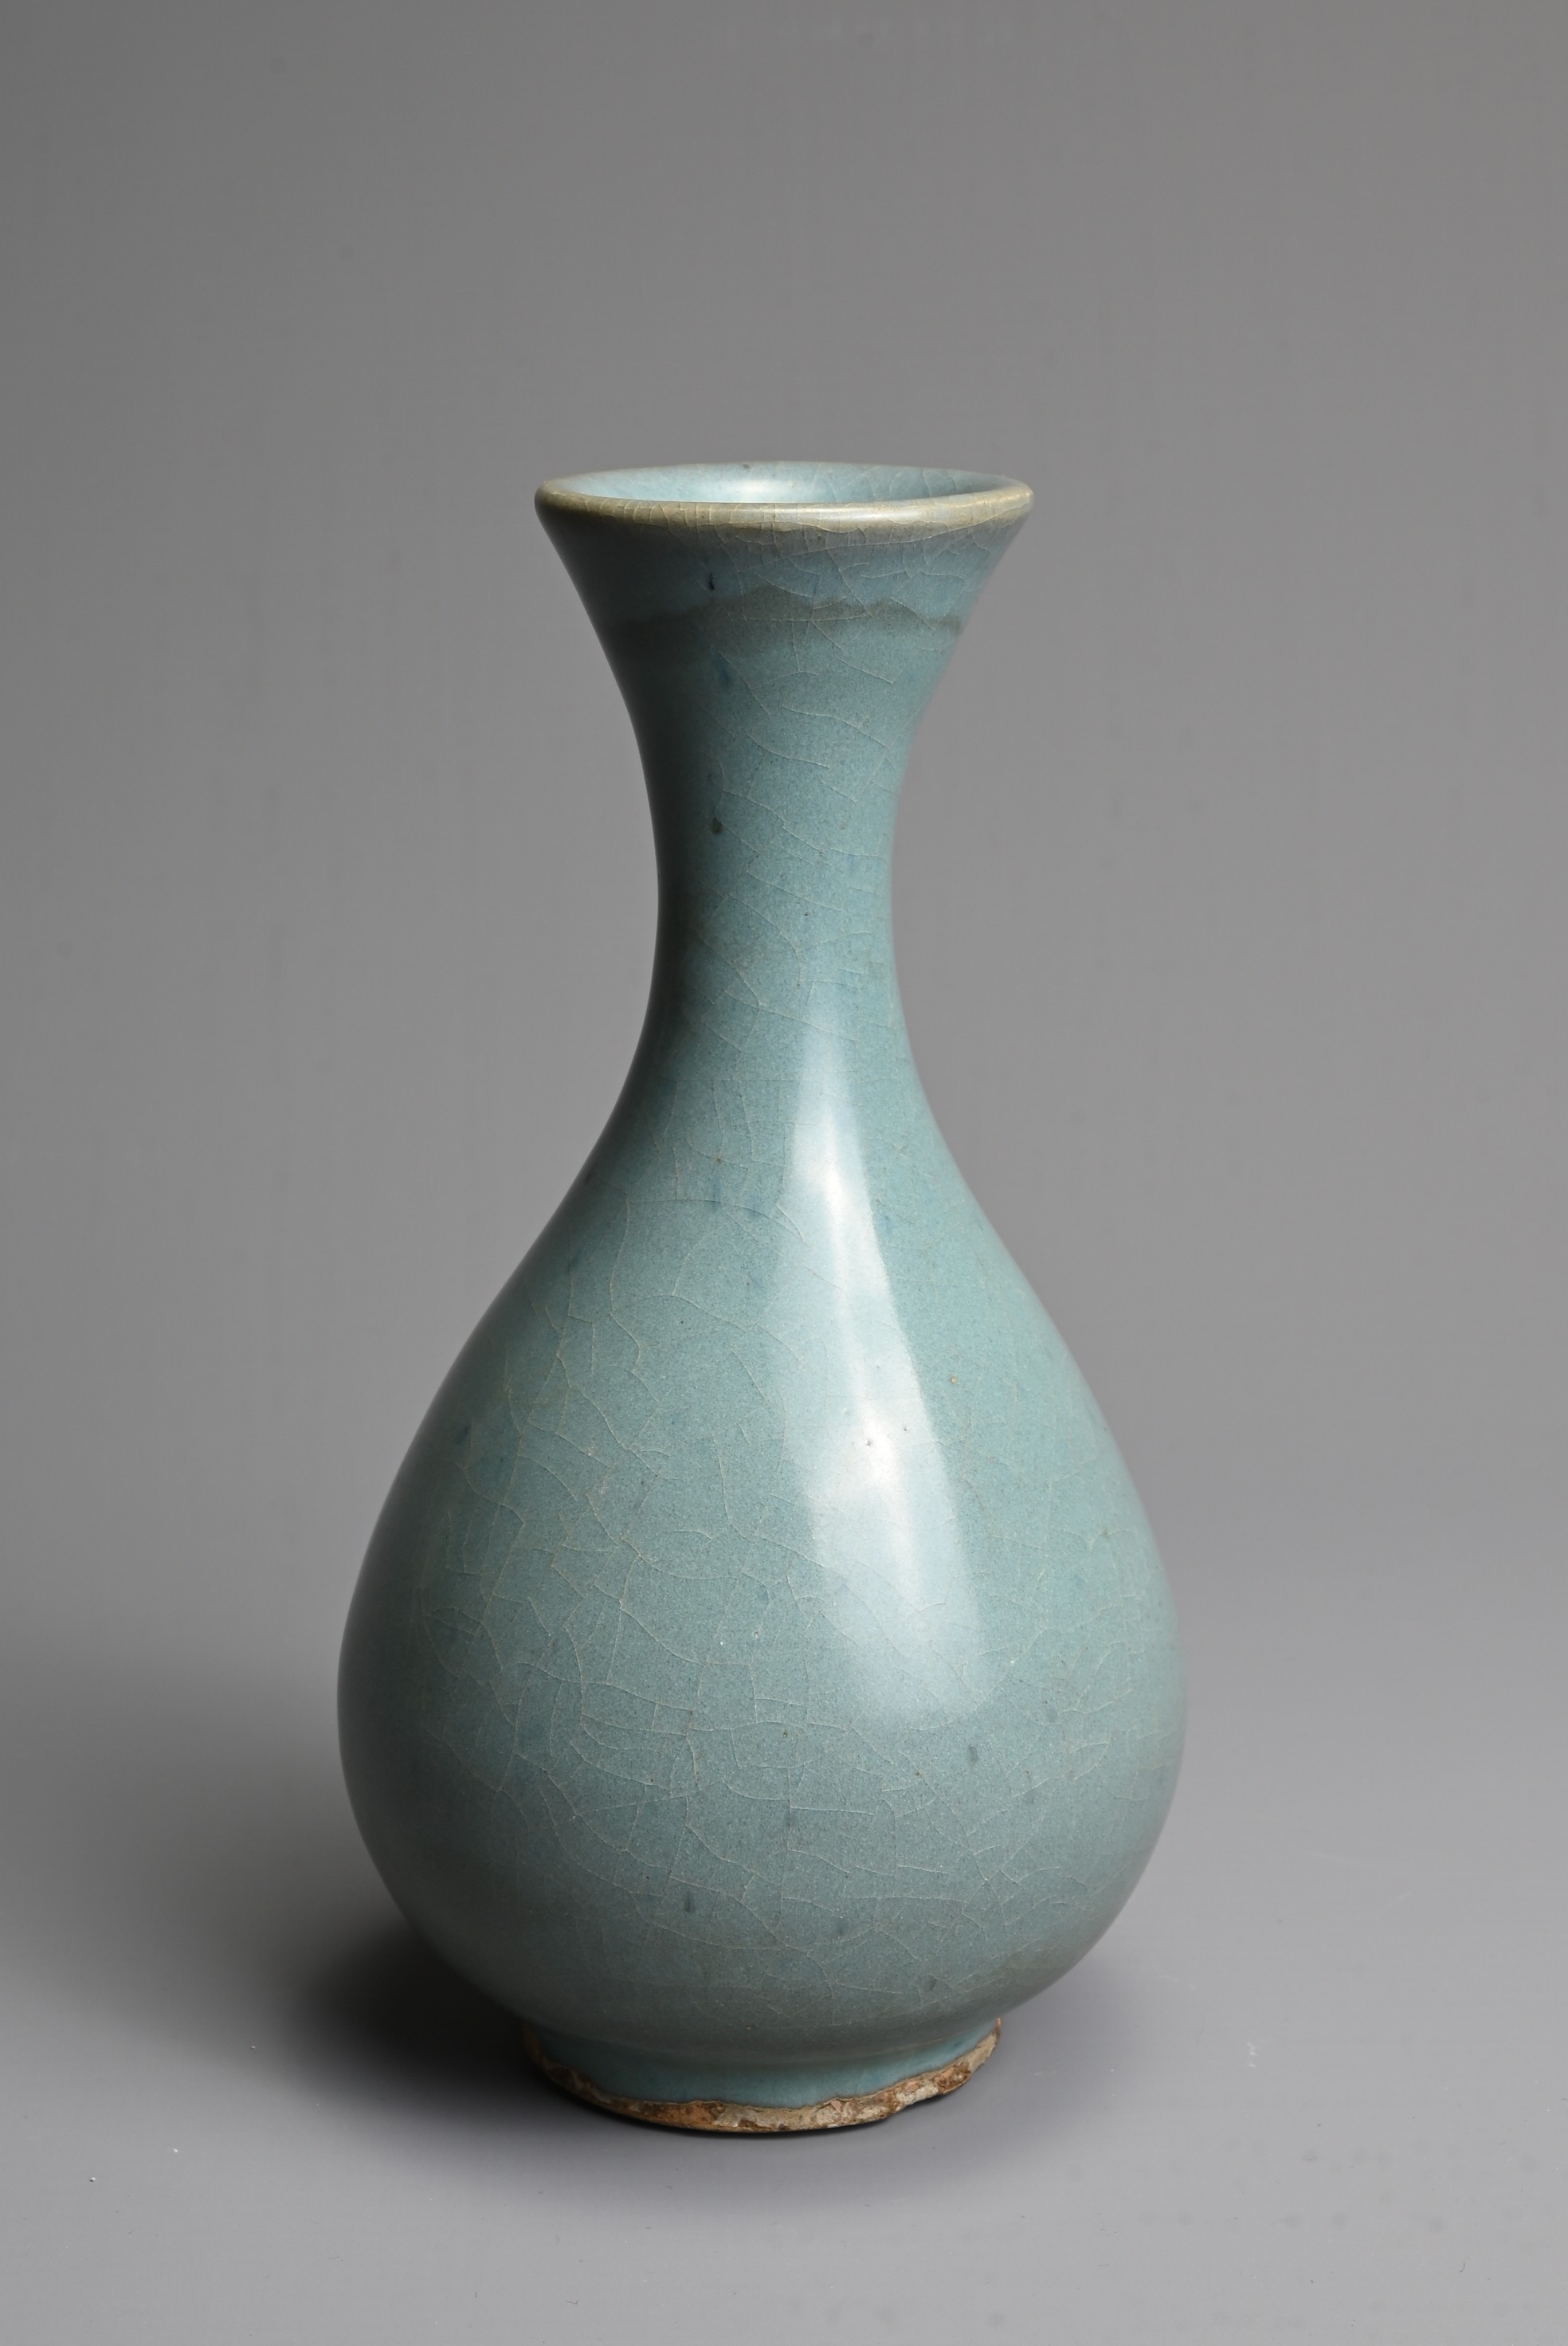 A CHINESE JUN TYPE BOTTLE VASE, SONG / YUAN DYNASTY. Pear shaped bottle with flared rim covered in a - Image 2 of 7